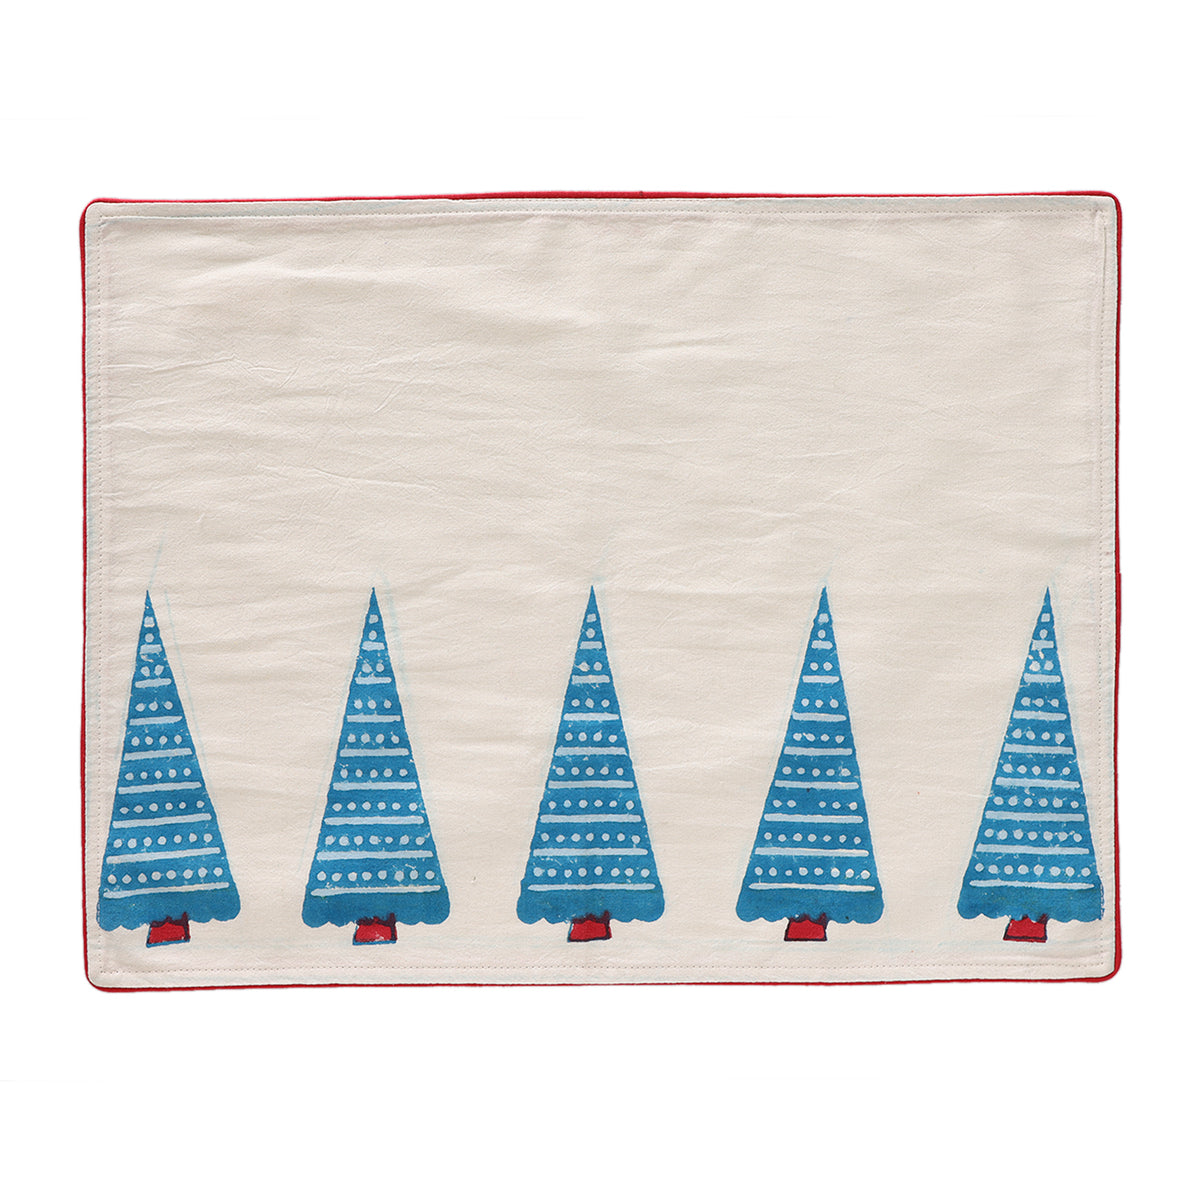 Hand Block Printed Cotton Table Mat in White, Blue & Red Tree Pattern - 14x18